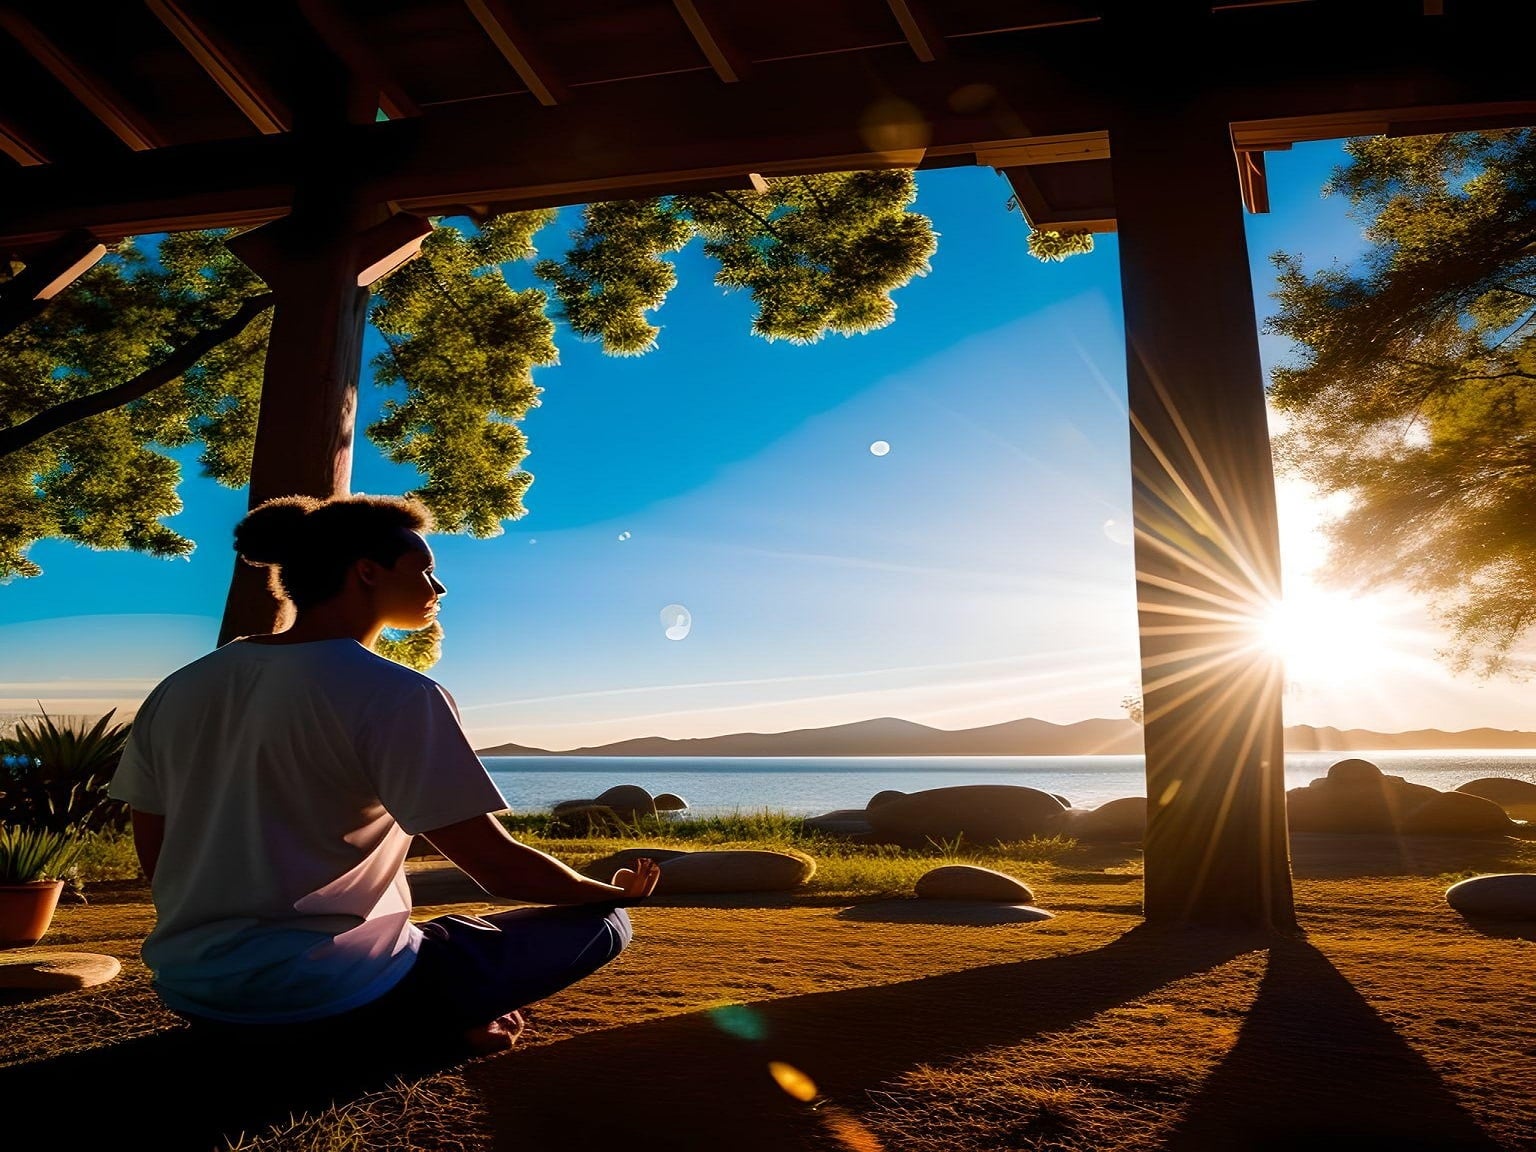 A person meditating in a serene setting, surrounded by soft rays of light and symbols representing intuition and spiritual connection.